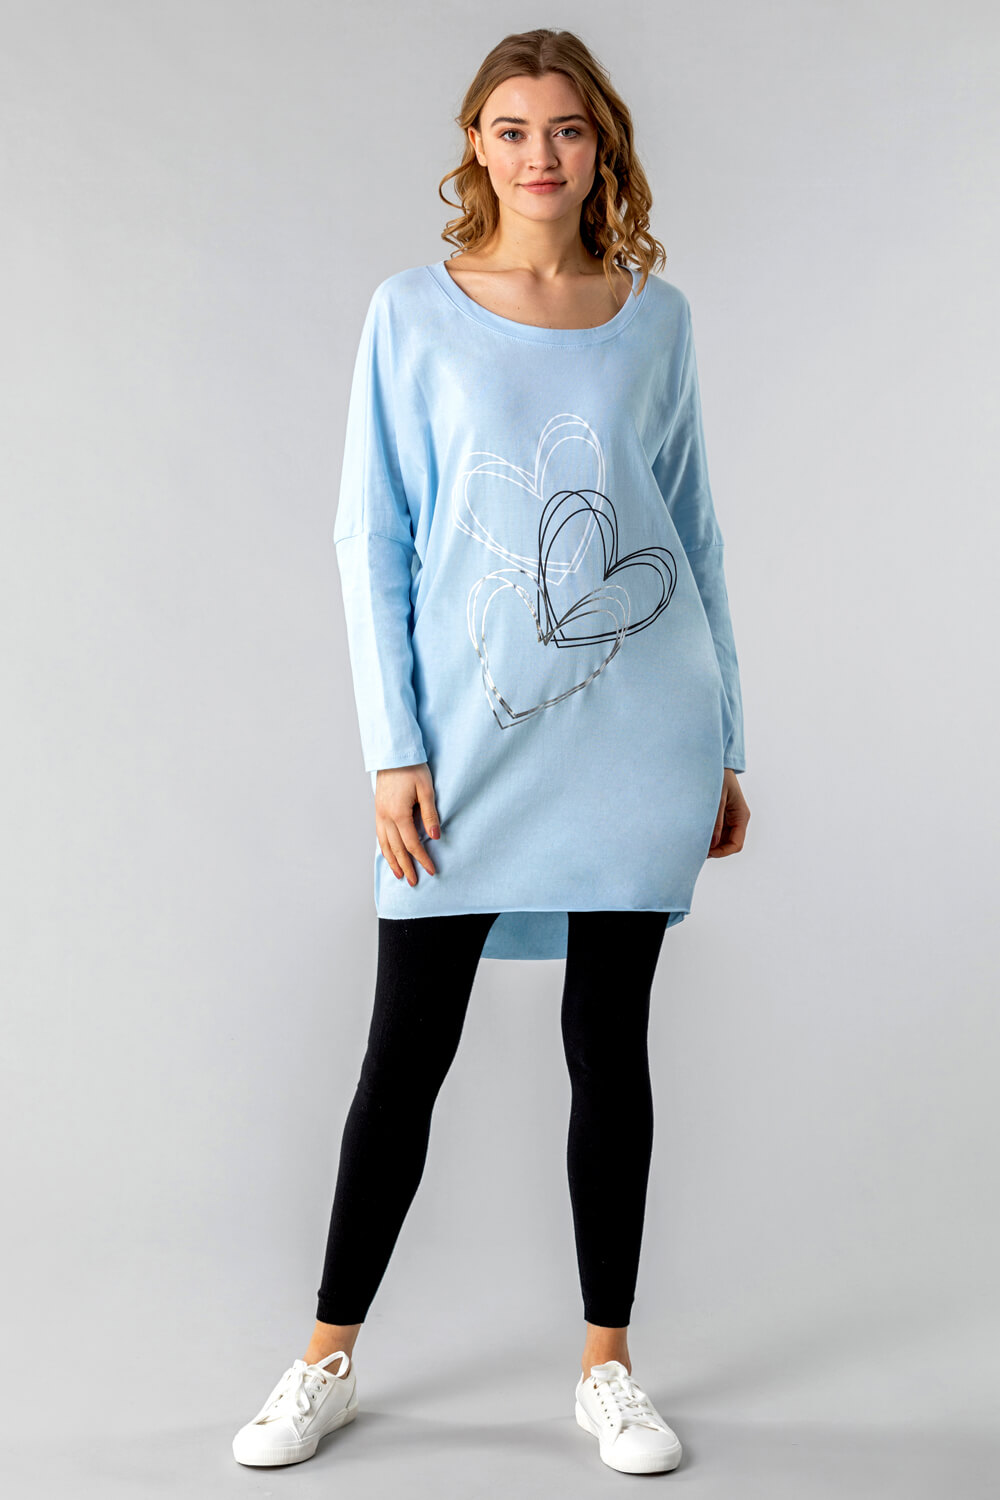 Light Blue  One Size Foil Heart Print Lounge Top, Image 2 of 4